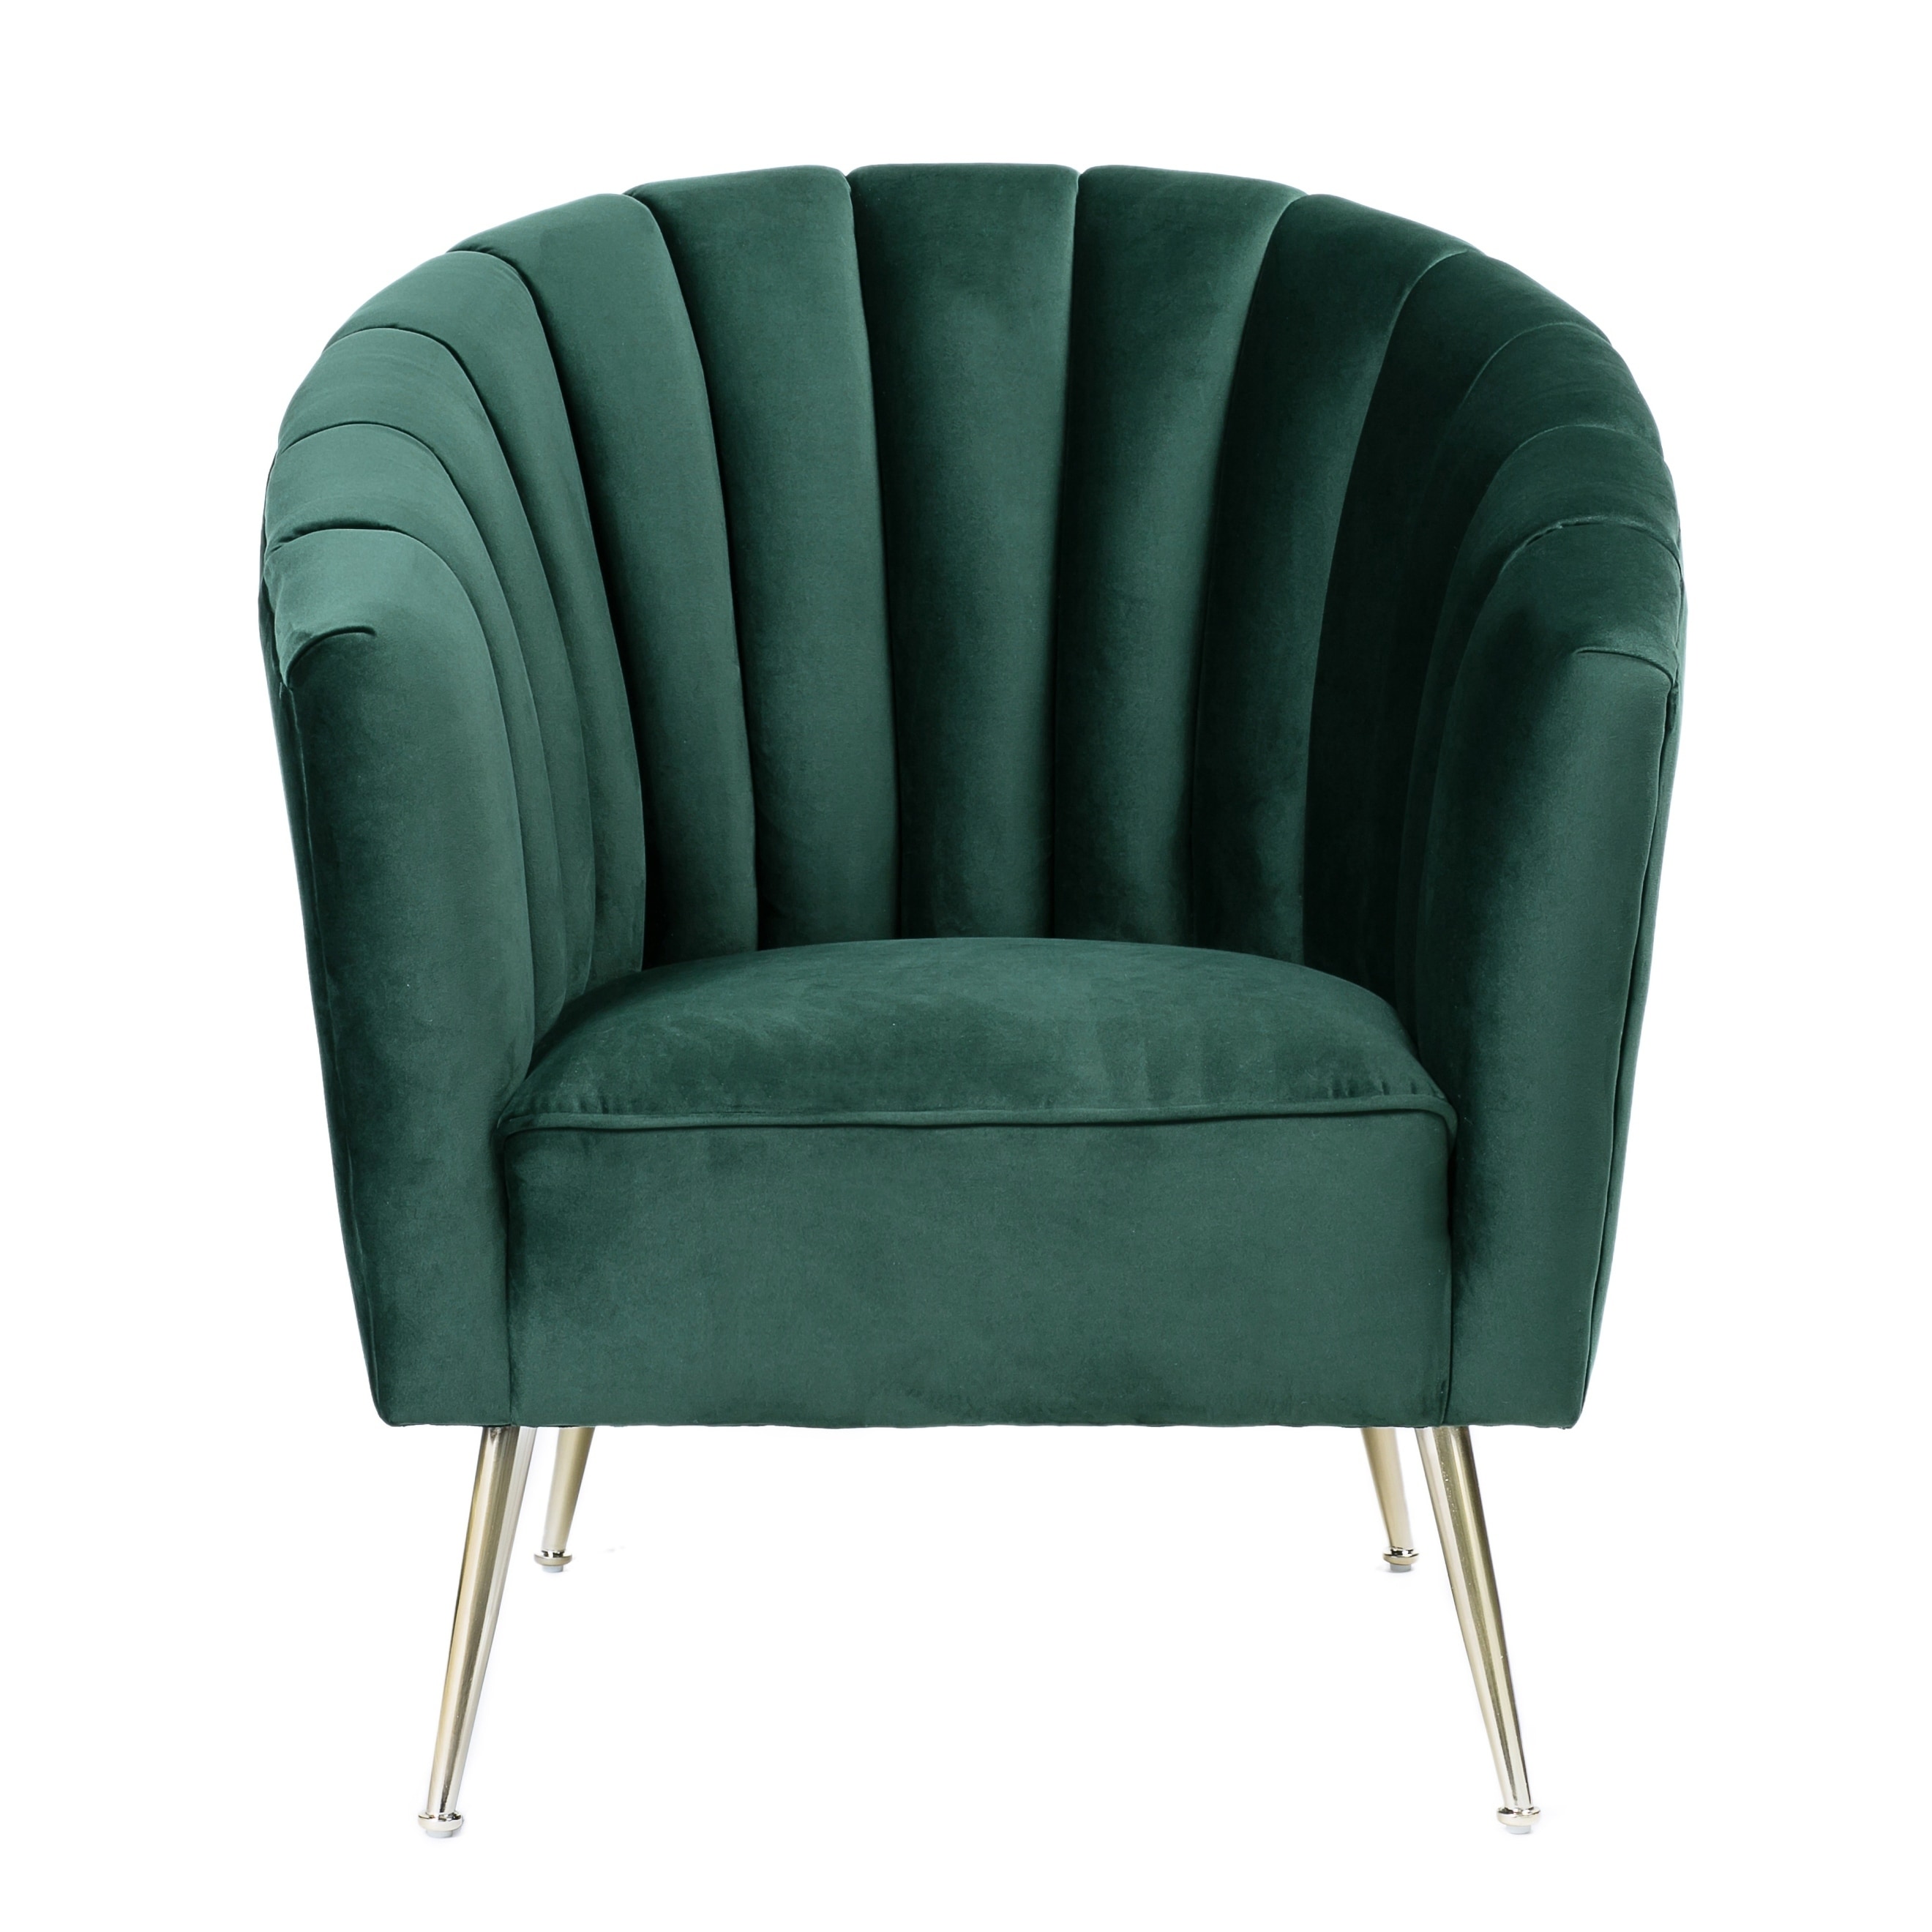 Arrow Green Sewing Chair with Scalloped Base Sewing Notions on